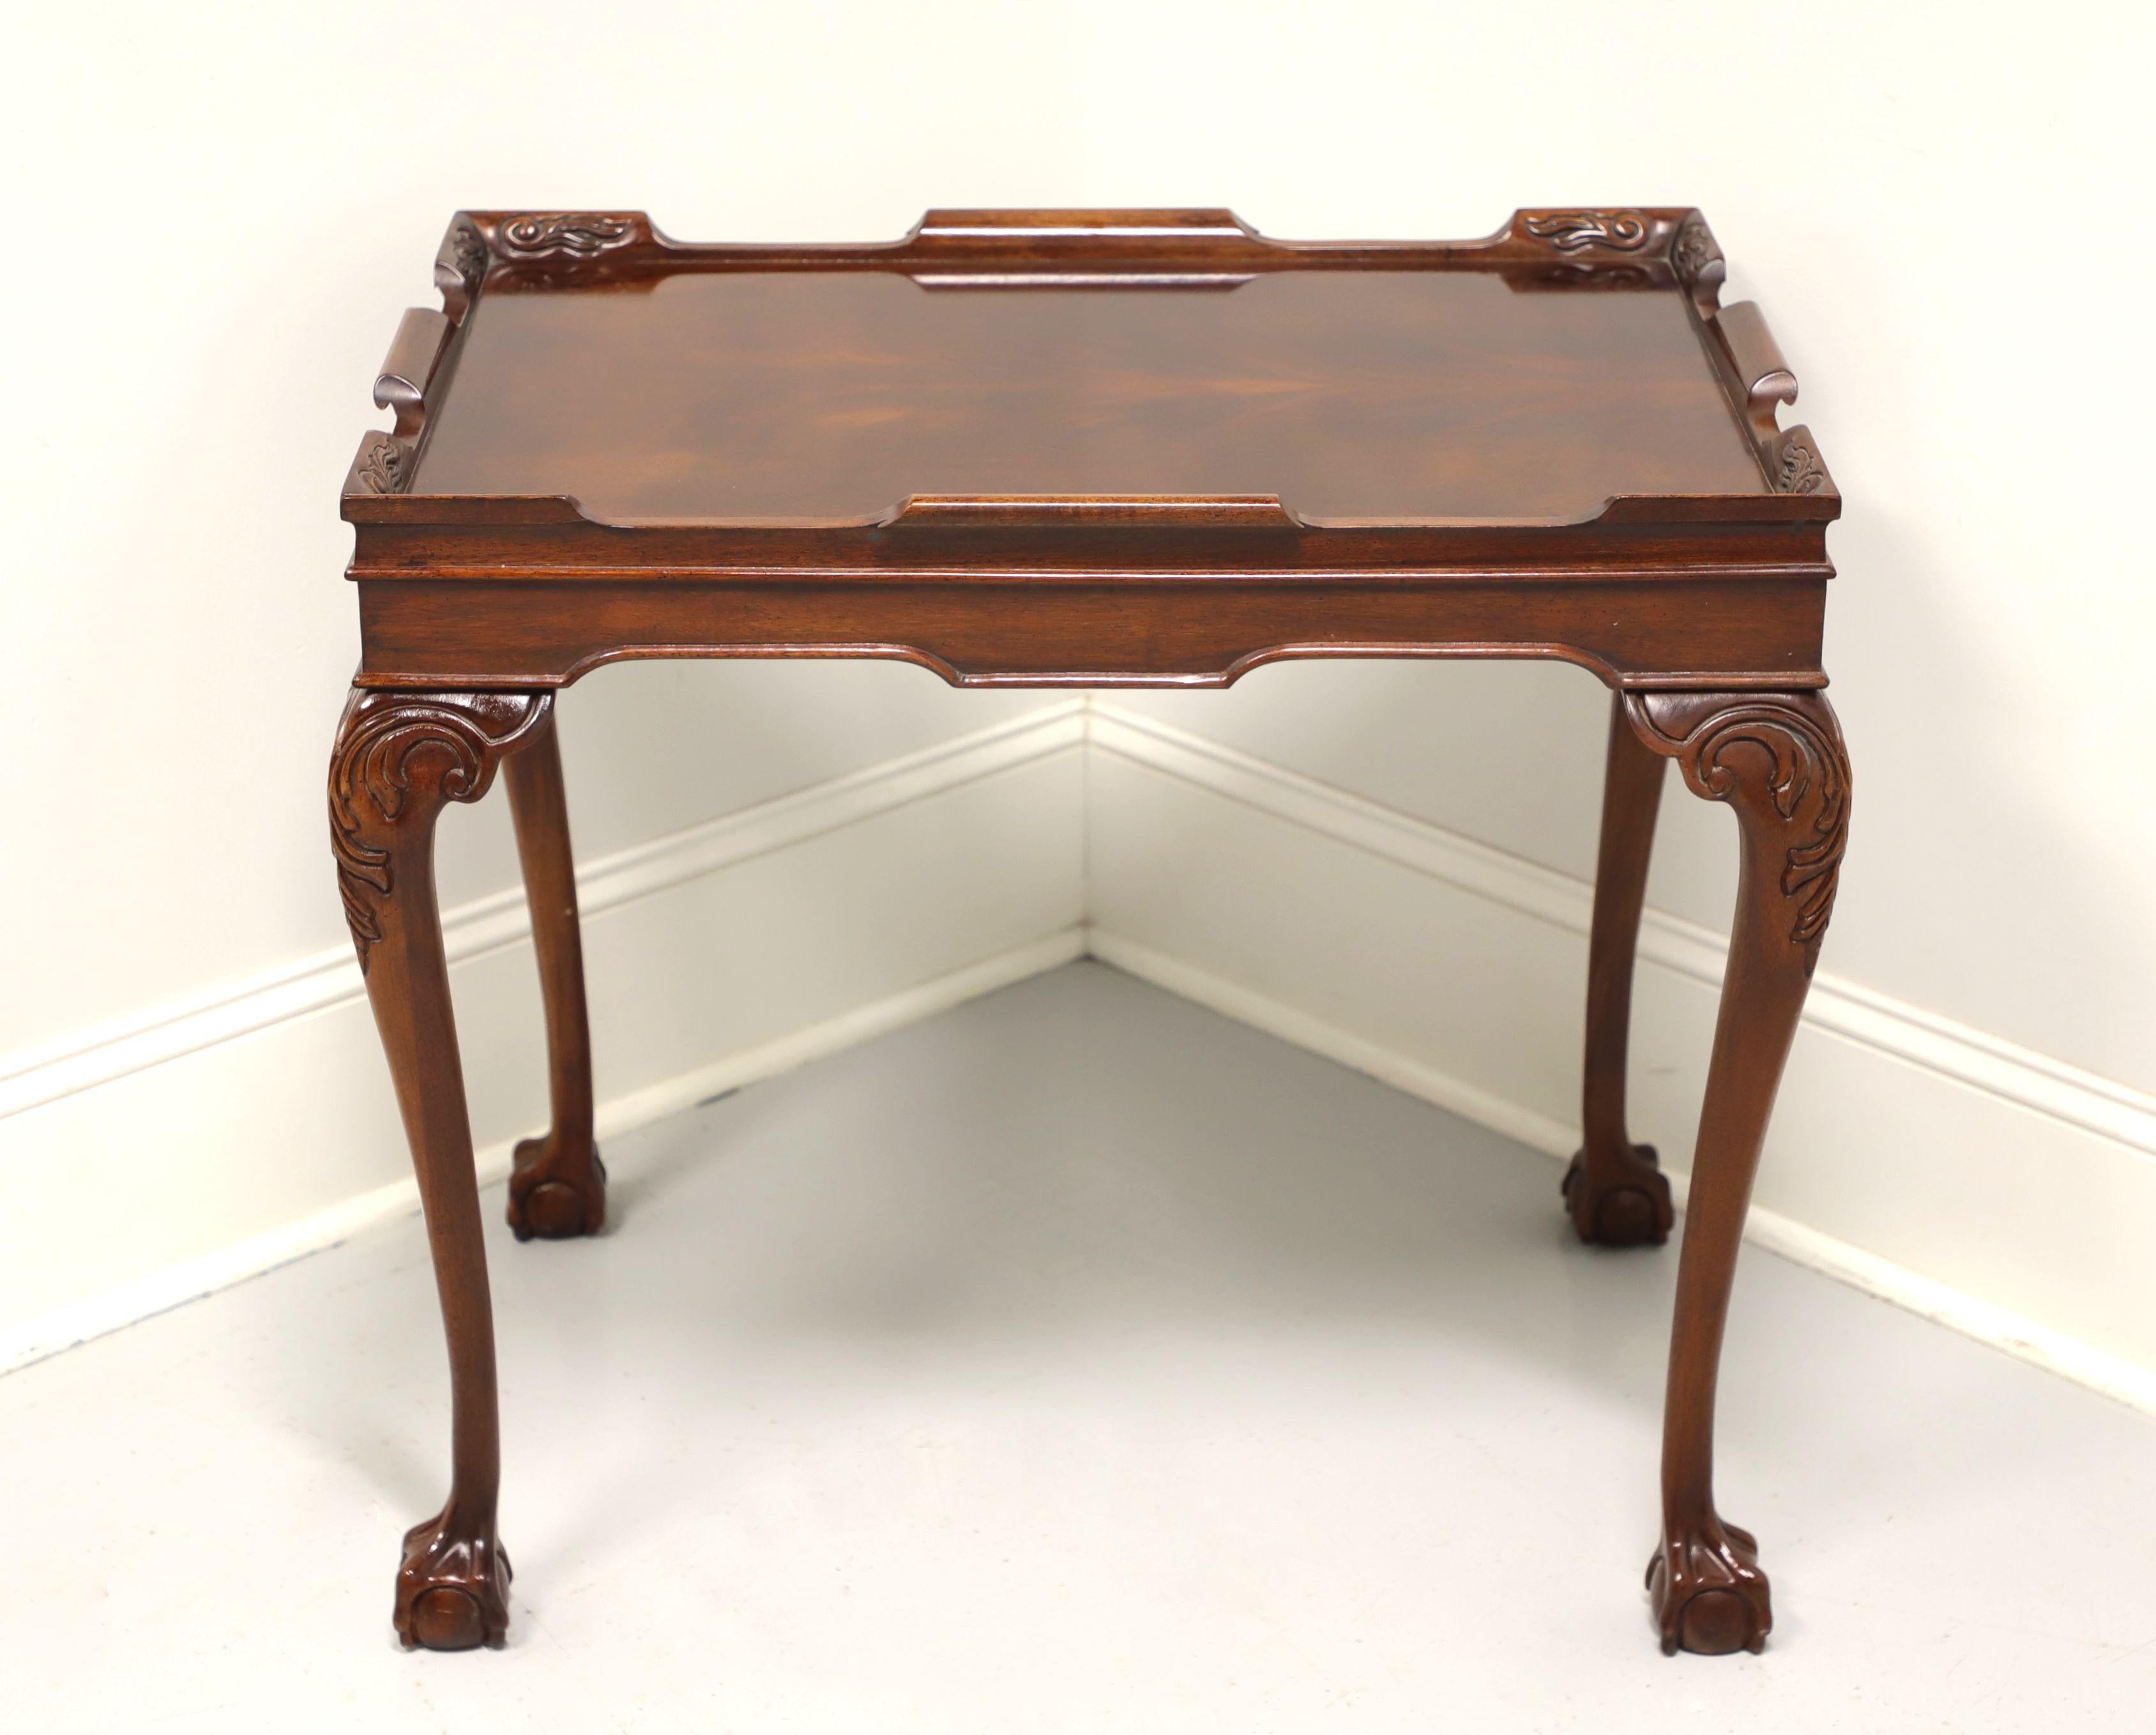 Late 20th Century Solid Flame Mahogany Chippendale Tea Table - A In Good Condition For Sale In Charlotte, NC